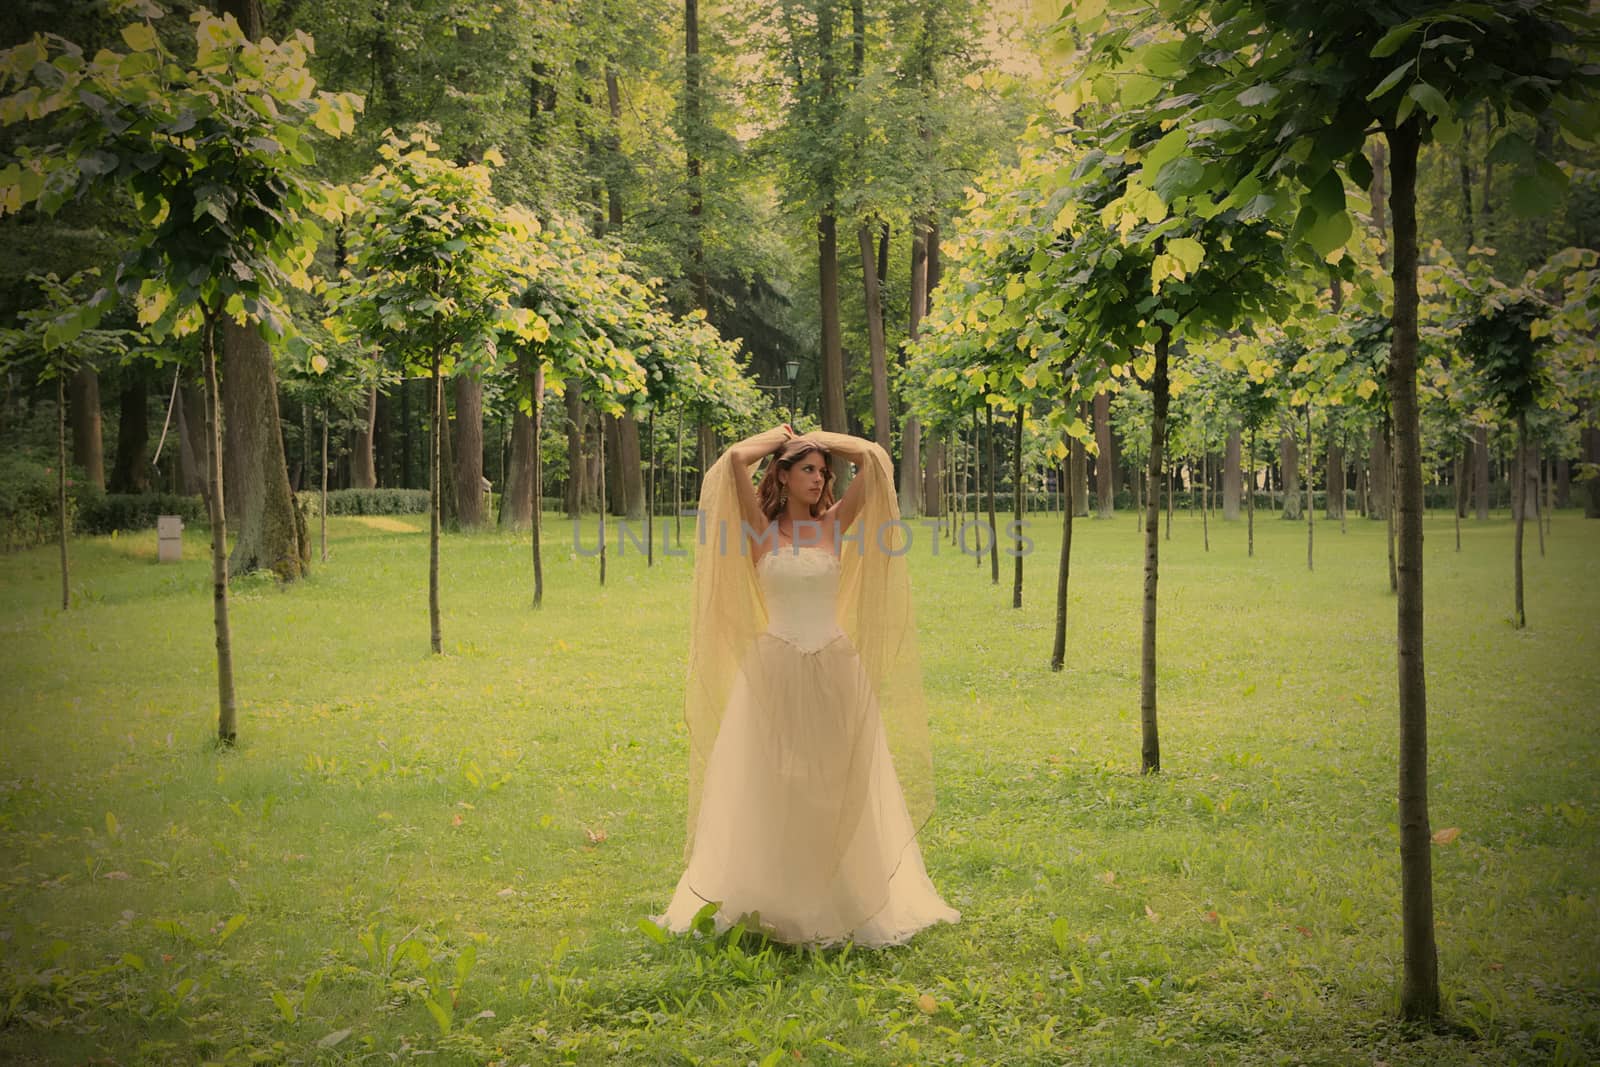 girl in white-golden gown in the summer park between young trees, instagram image style